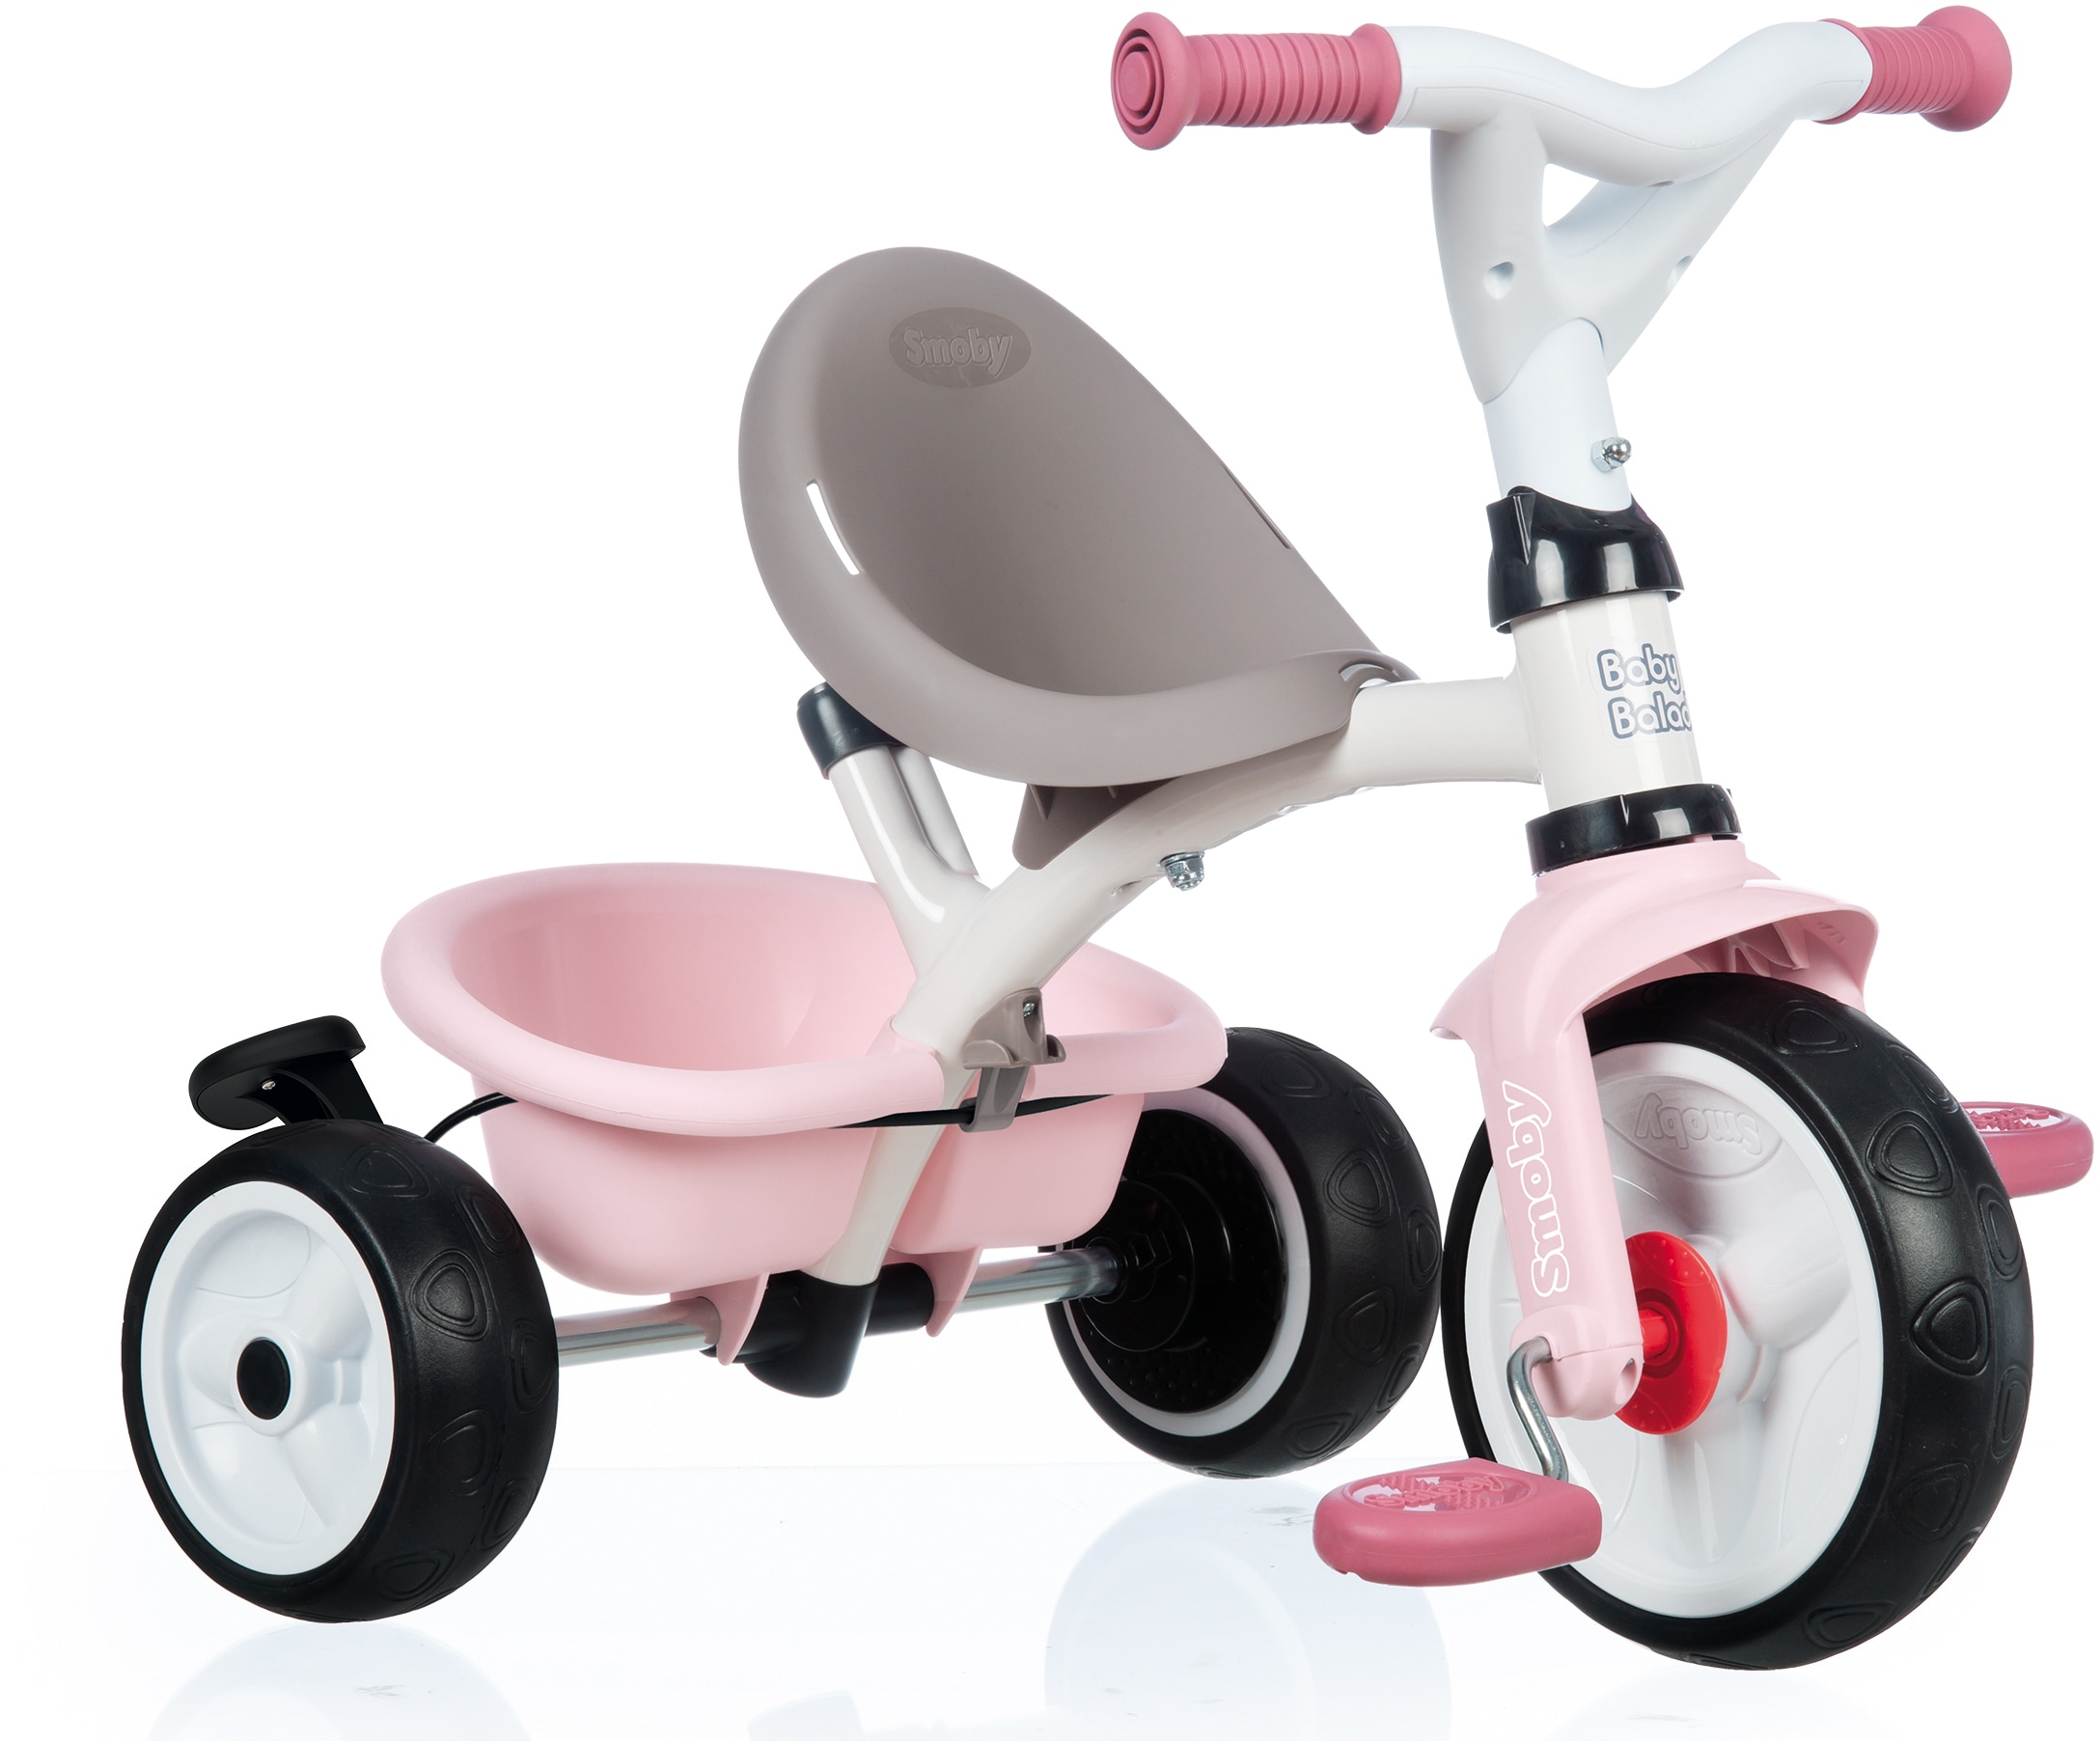 Smoby Europe bei in mit Sonnendach; Plus, rosa«, Balade Made »Baby Dreirad